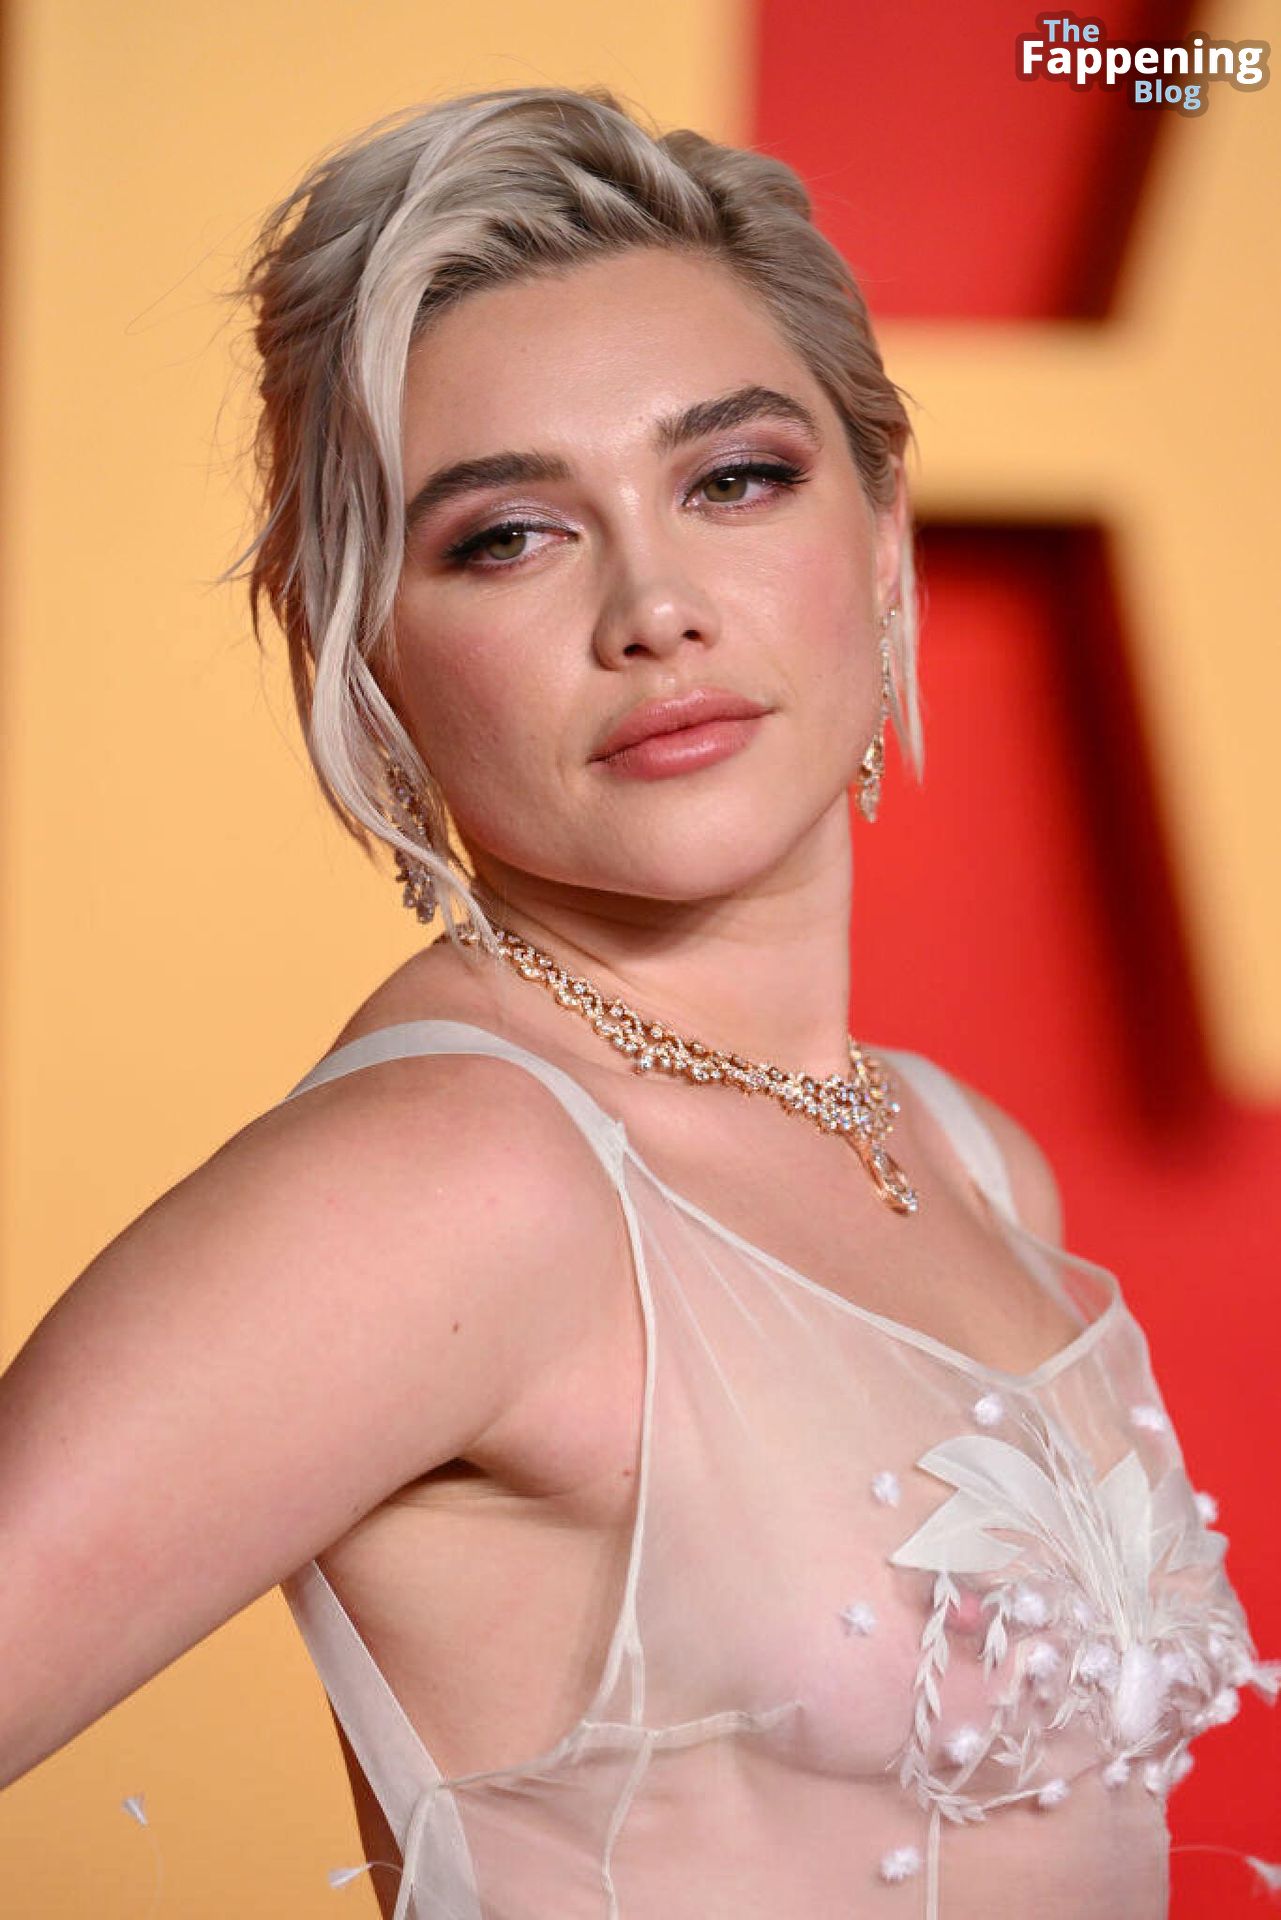 Florence-Pugh-Nude-25-The-Fappening-Blog.jpg